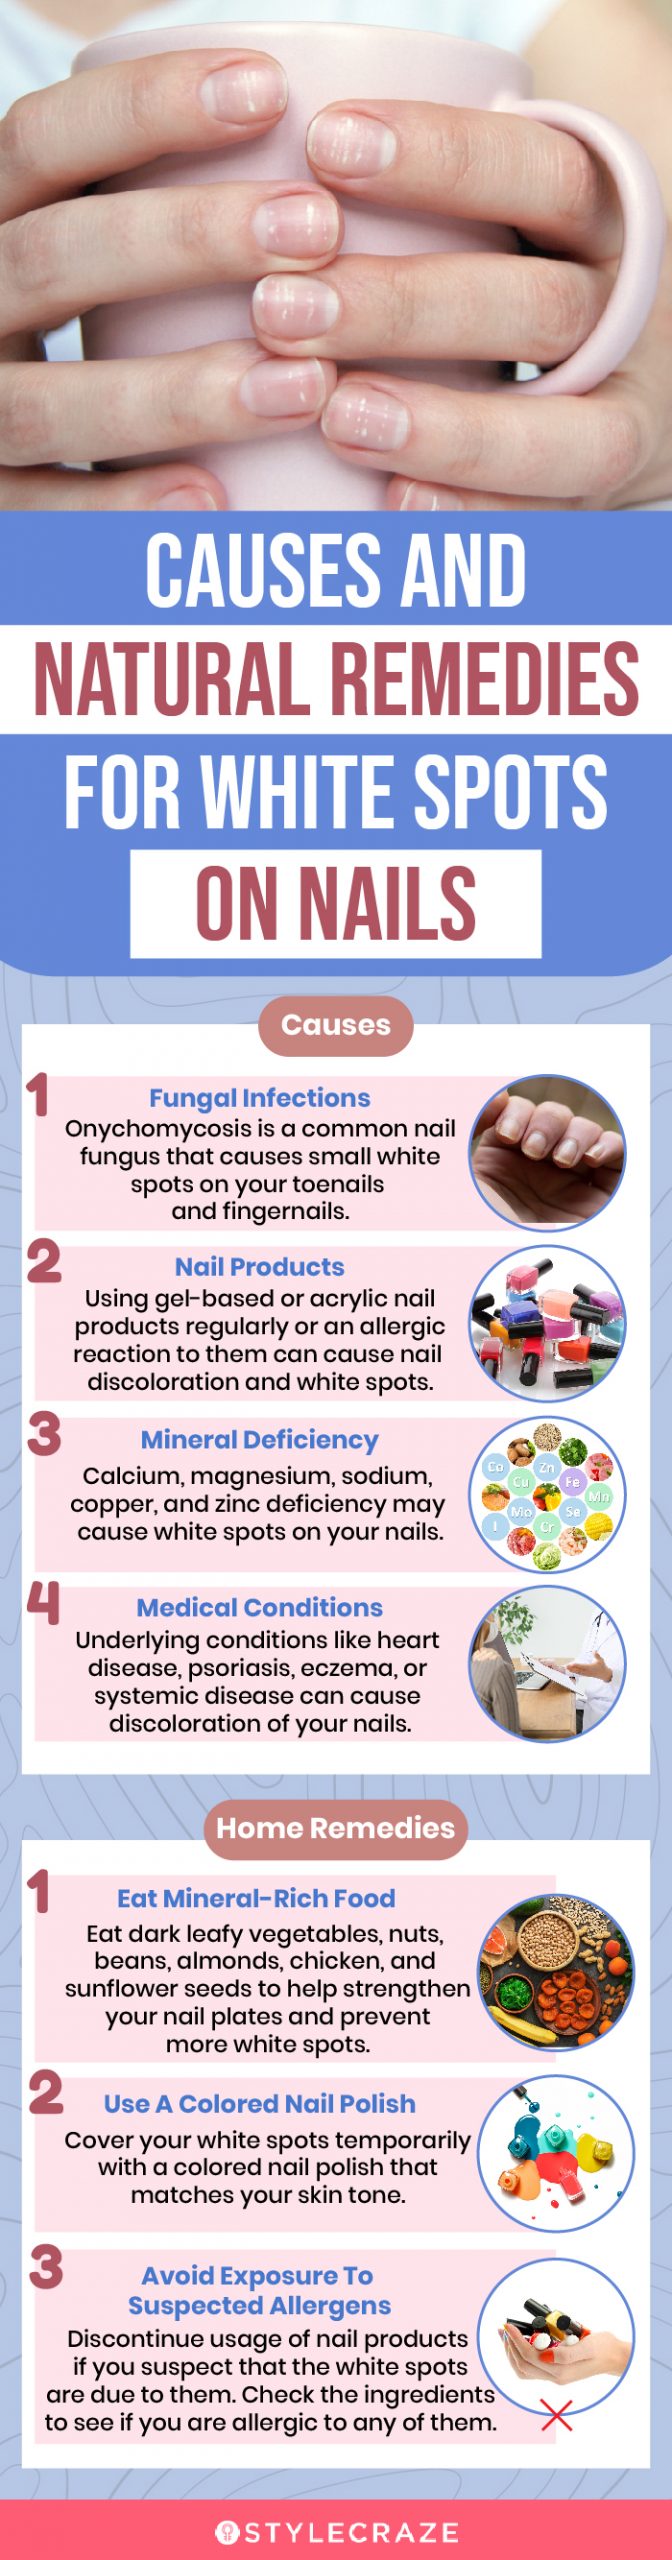 causes and natural remedies for white spots on nails (infographic)